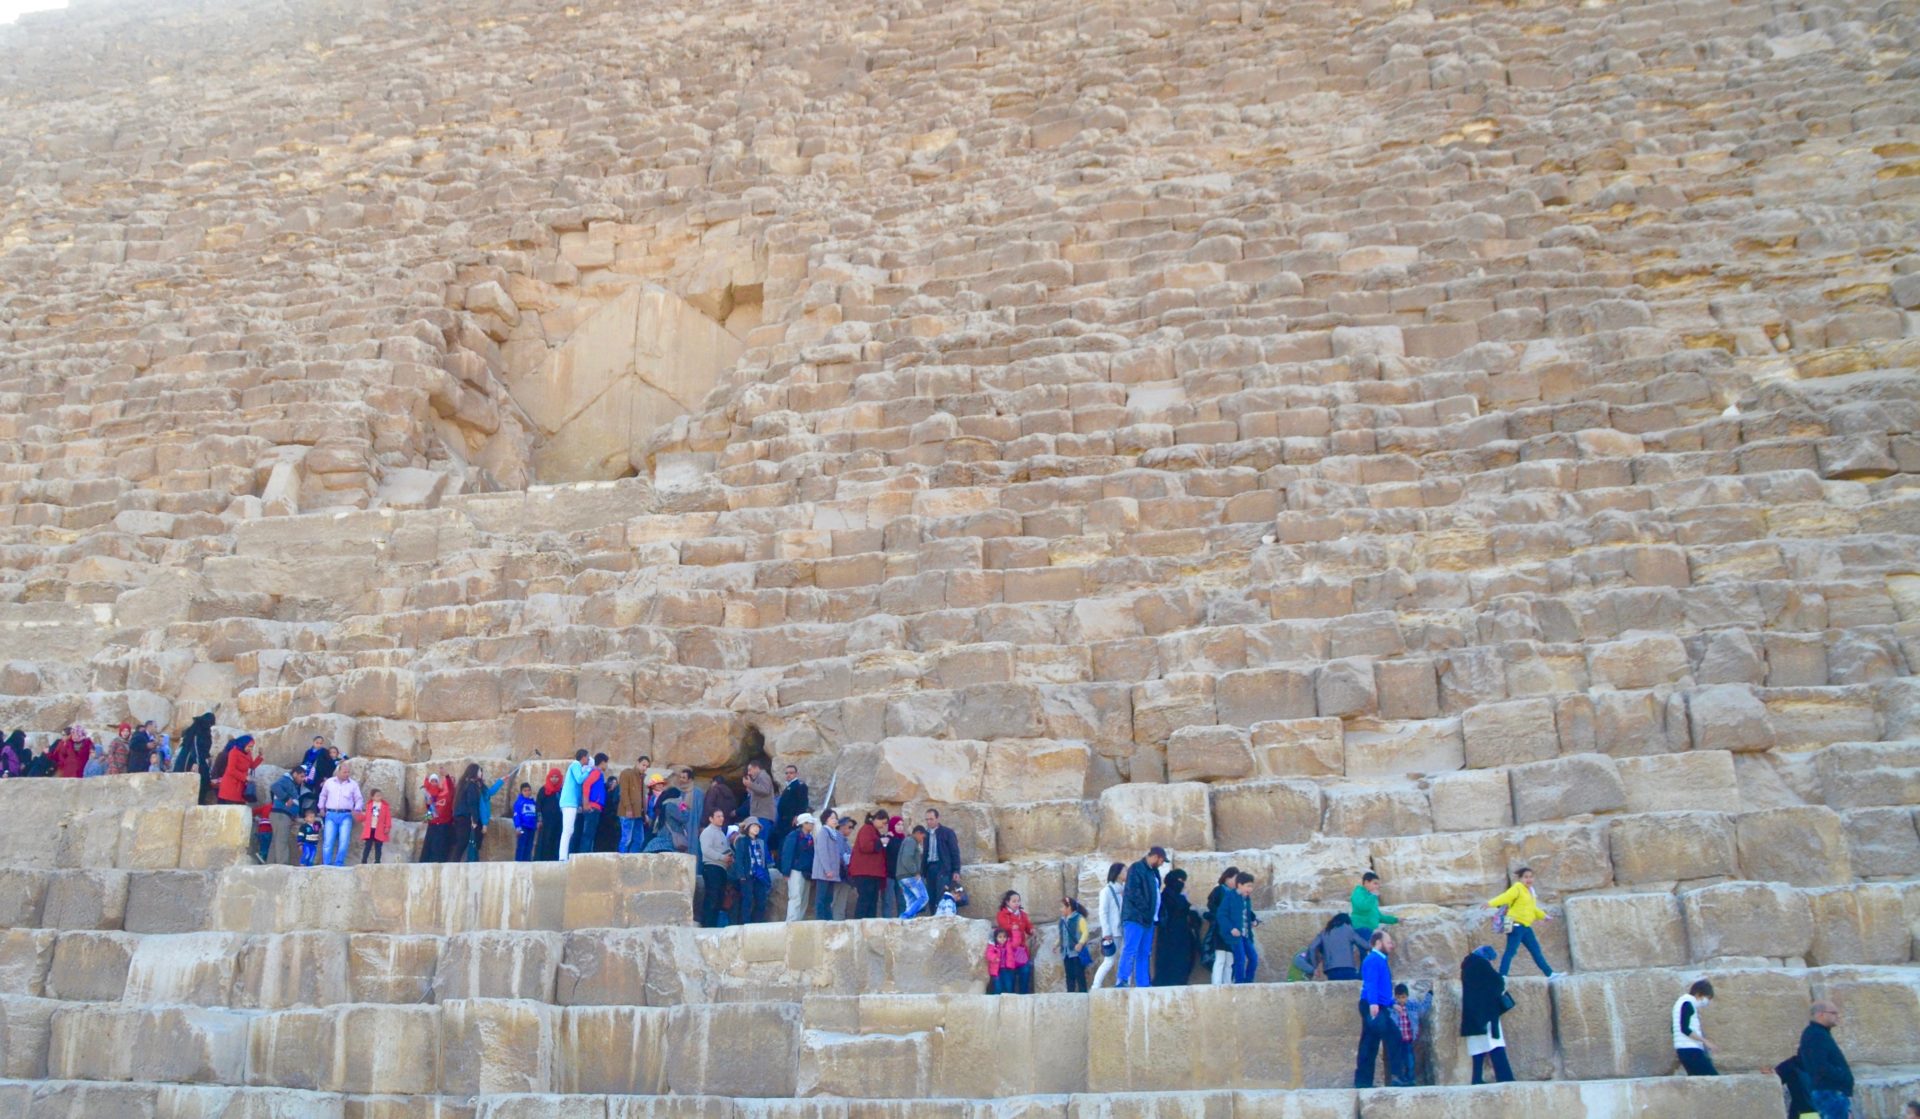 Hordes Waiting to Enter the Great Pyramid